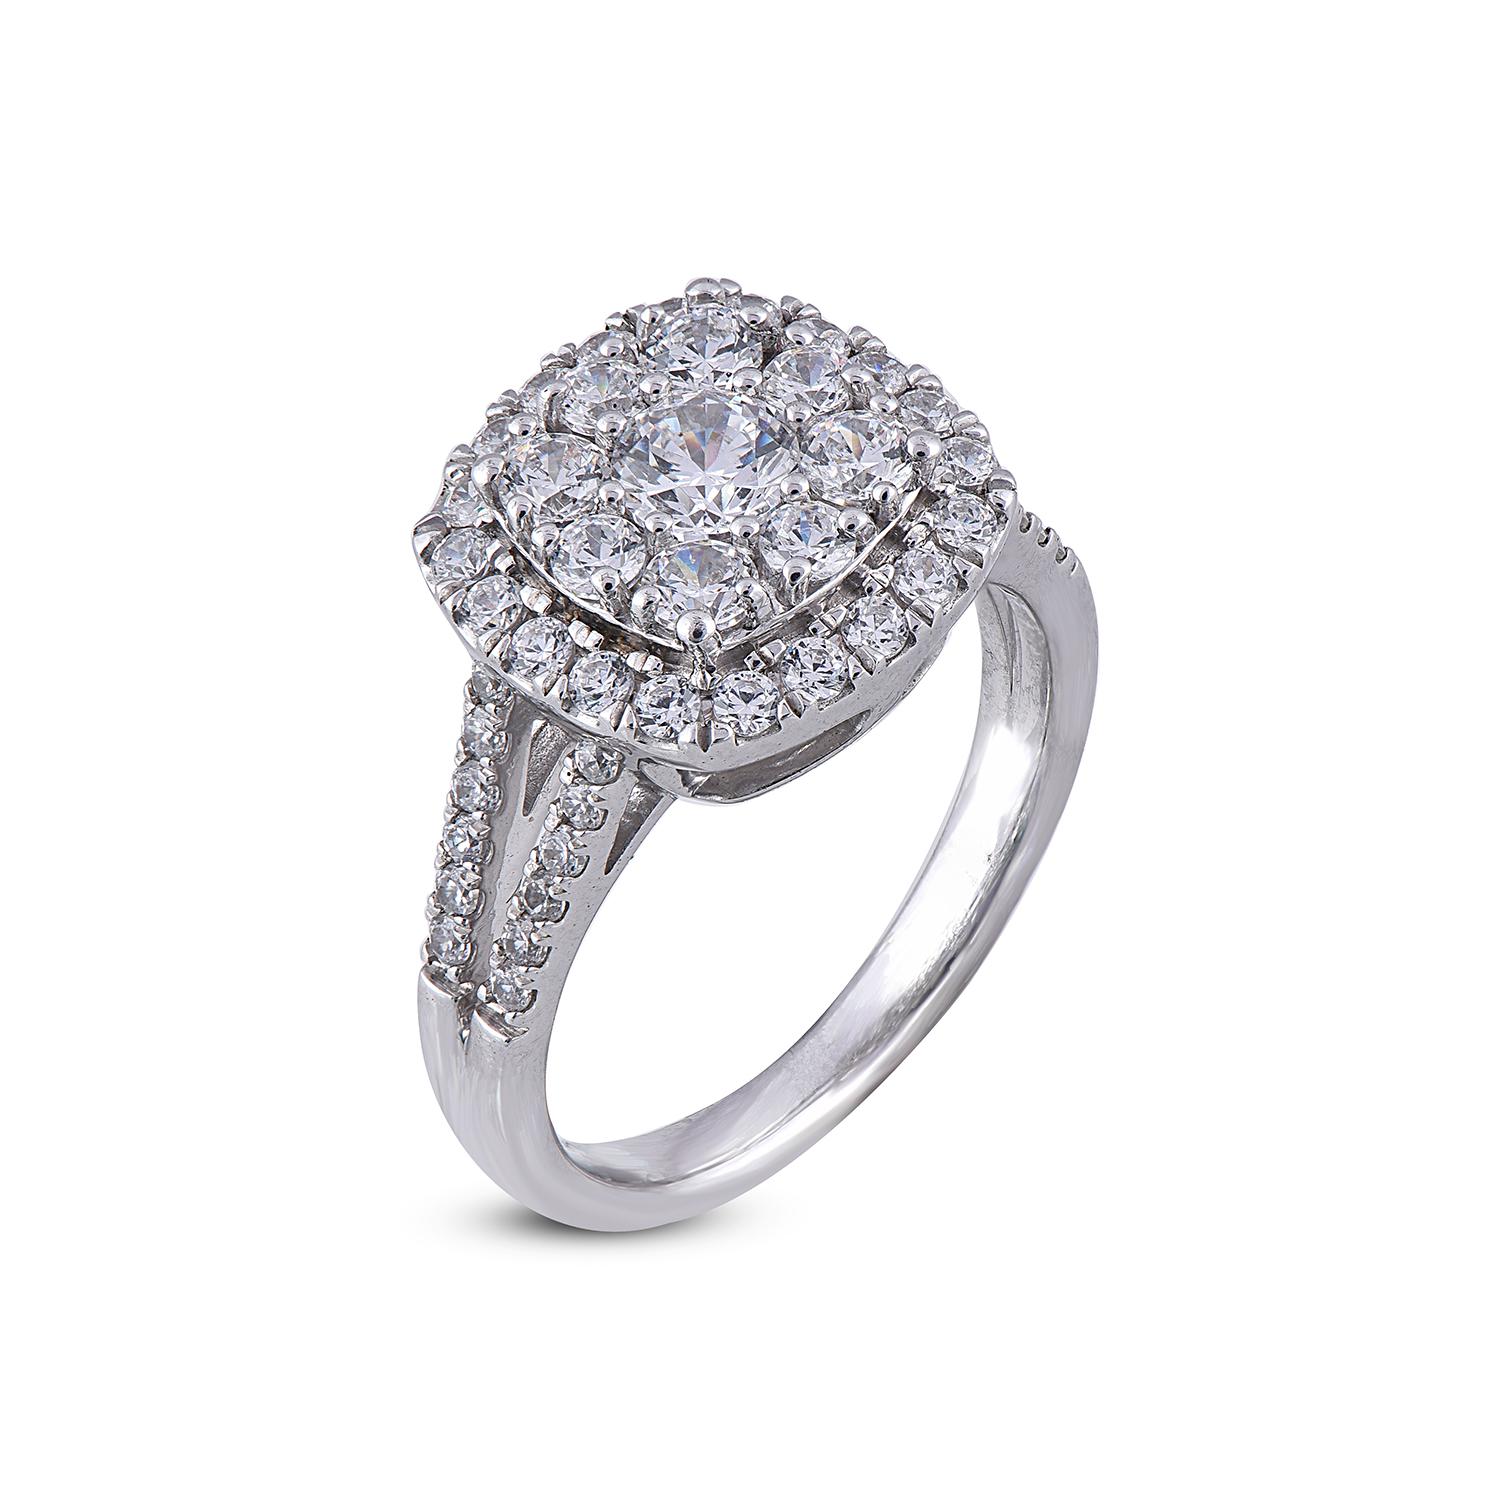 Just her style, these sparkling diamond engagement ring are certain to dazzle and delight. Handcrafted by our experts in 14 karat white gold and studded with 53 round diamond set in prong and Pressure setting, glitters in HI color I2 clarity.